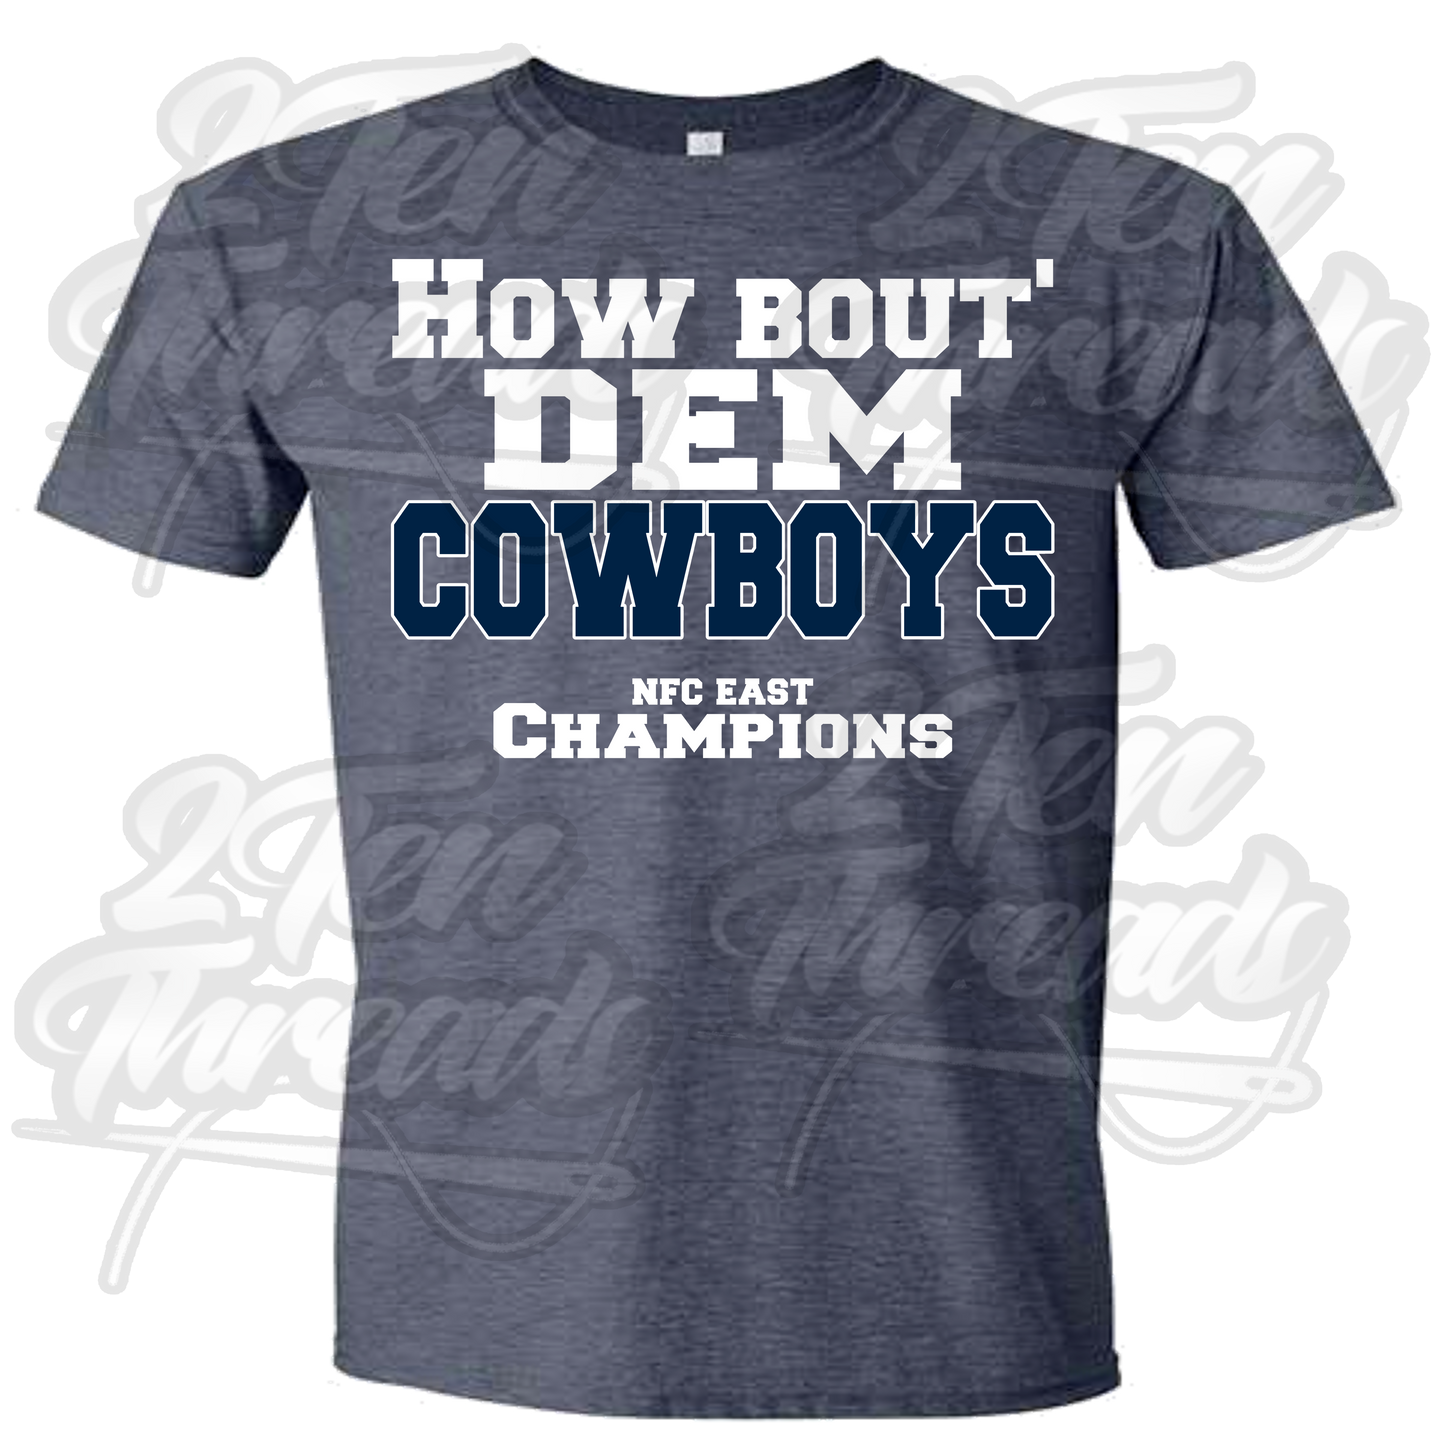 How bout NFC East Champs